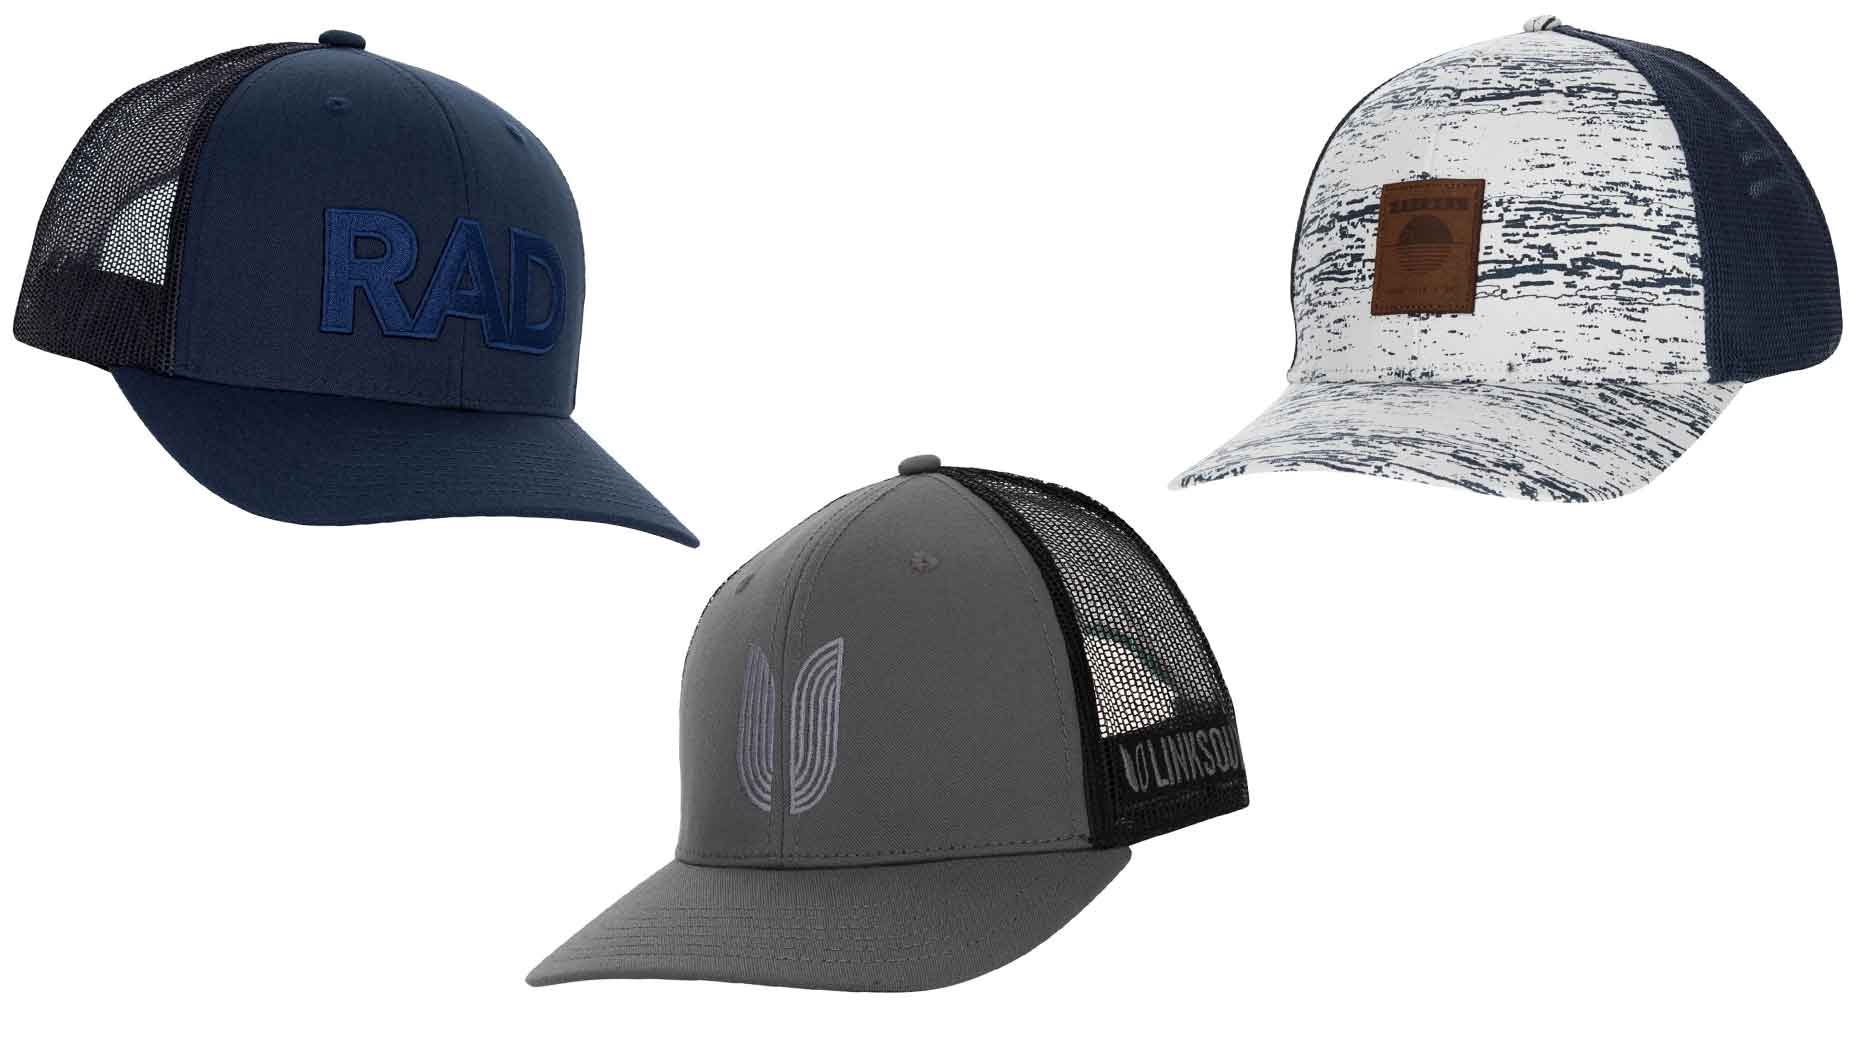 Kolibrie diamant Punt These 5 trucker hats are perfect for summer rounds